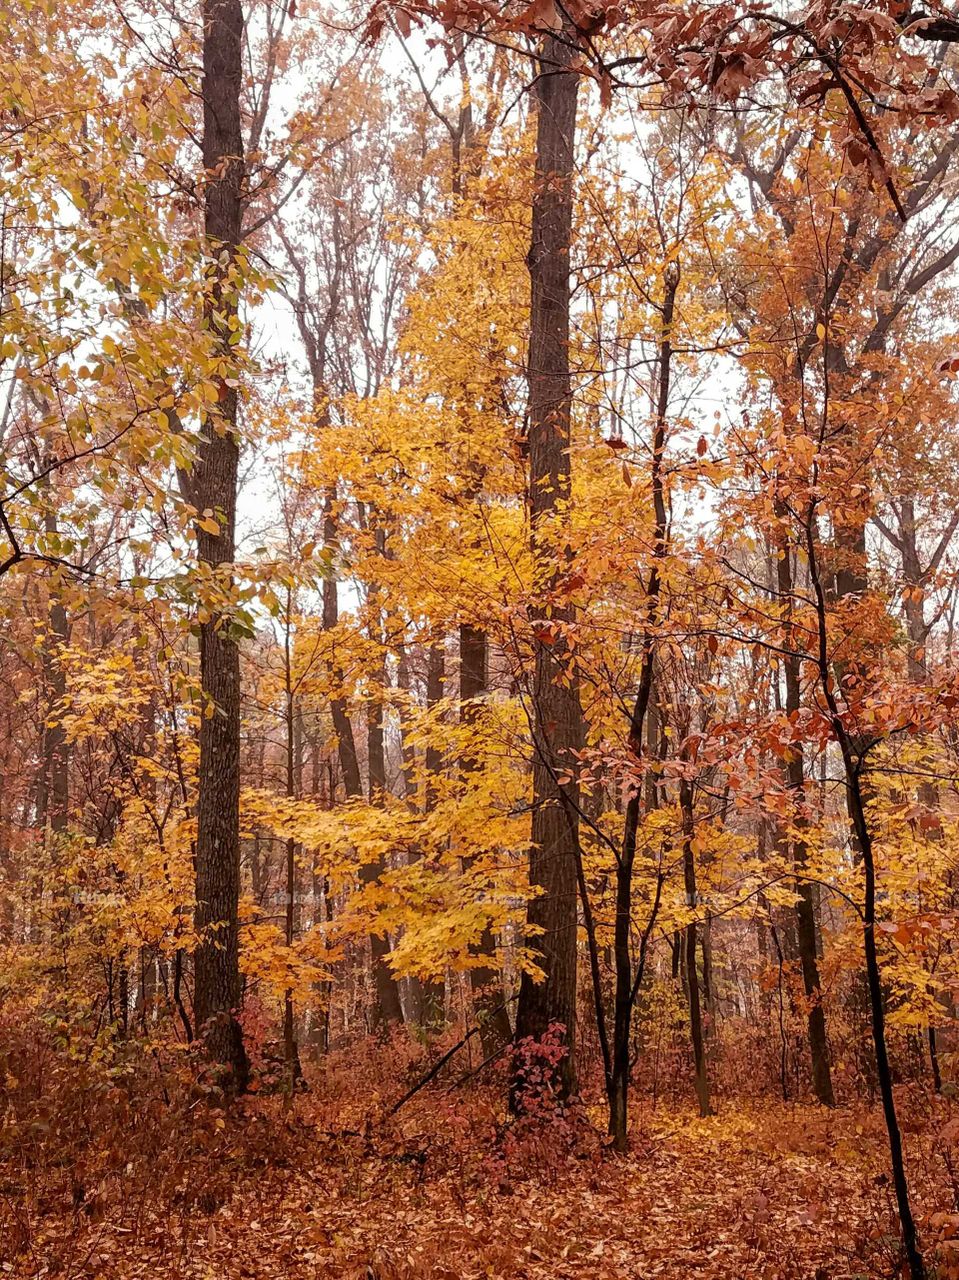 The Yellow Tree in this Photo was Especially Vibrant on a Damp Day in the Woods